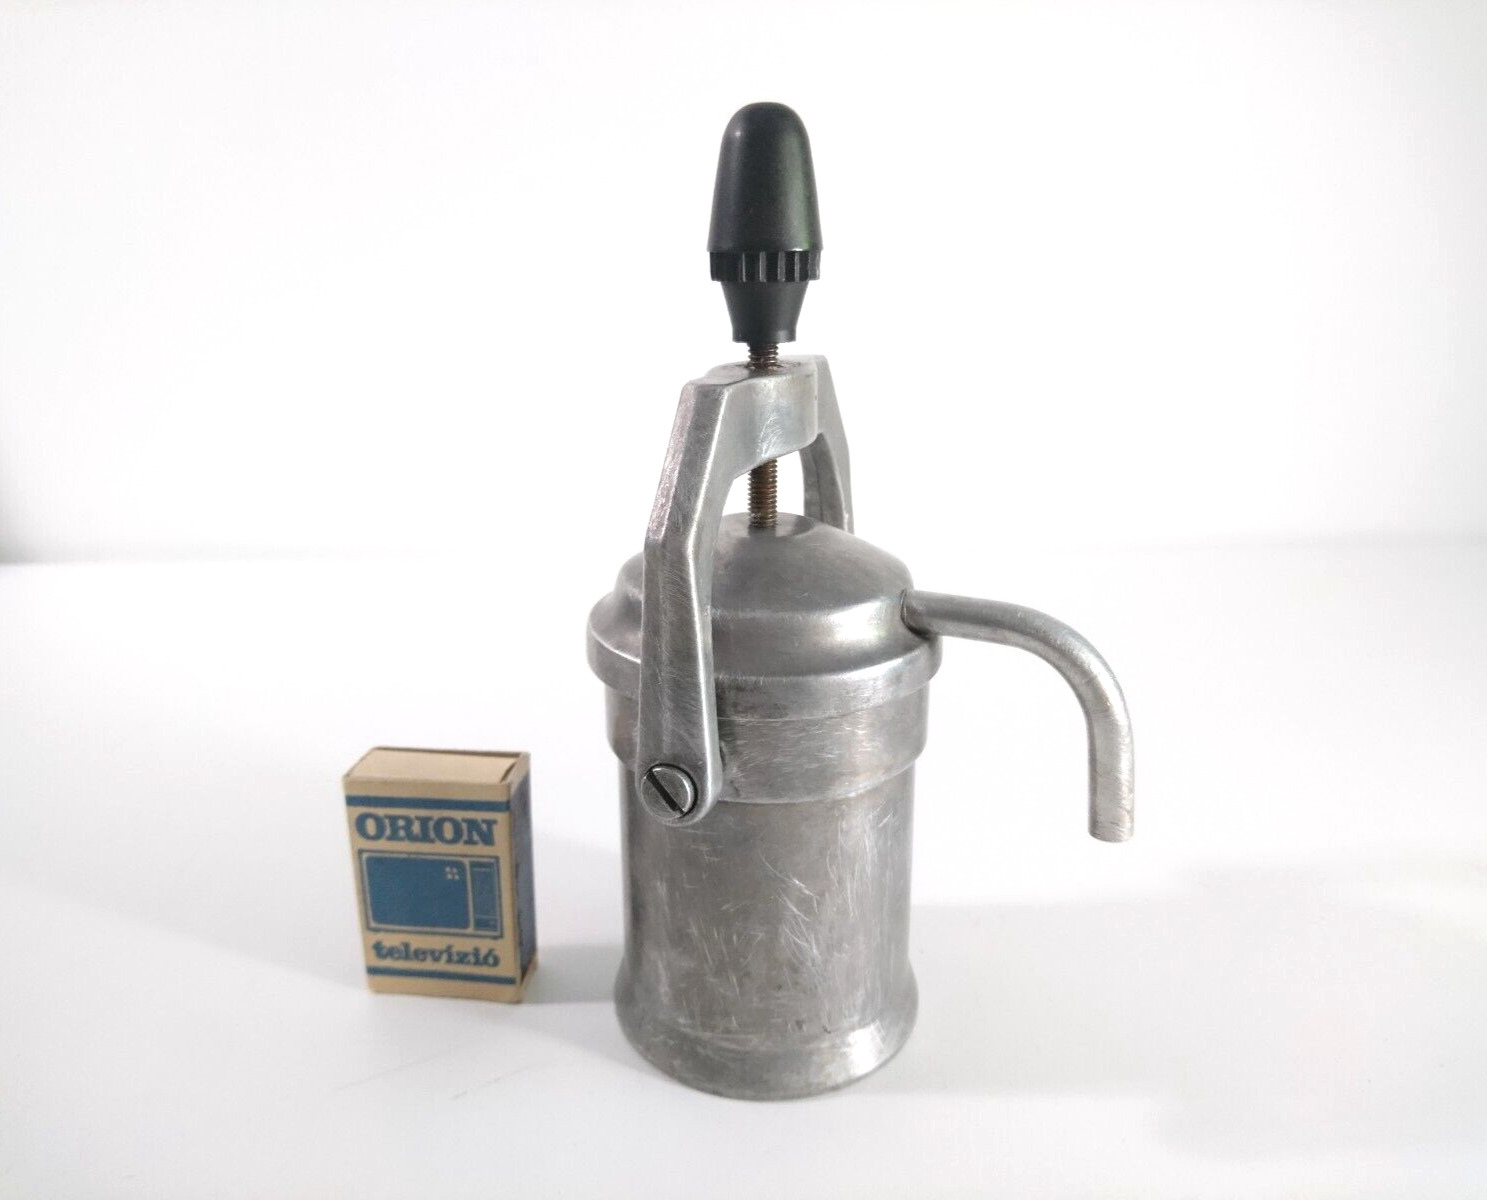 Vintage Espresso Coffee Maker, Manual, Stove Top, 1960s Hungary